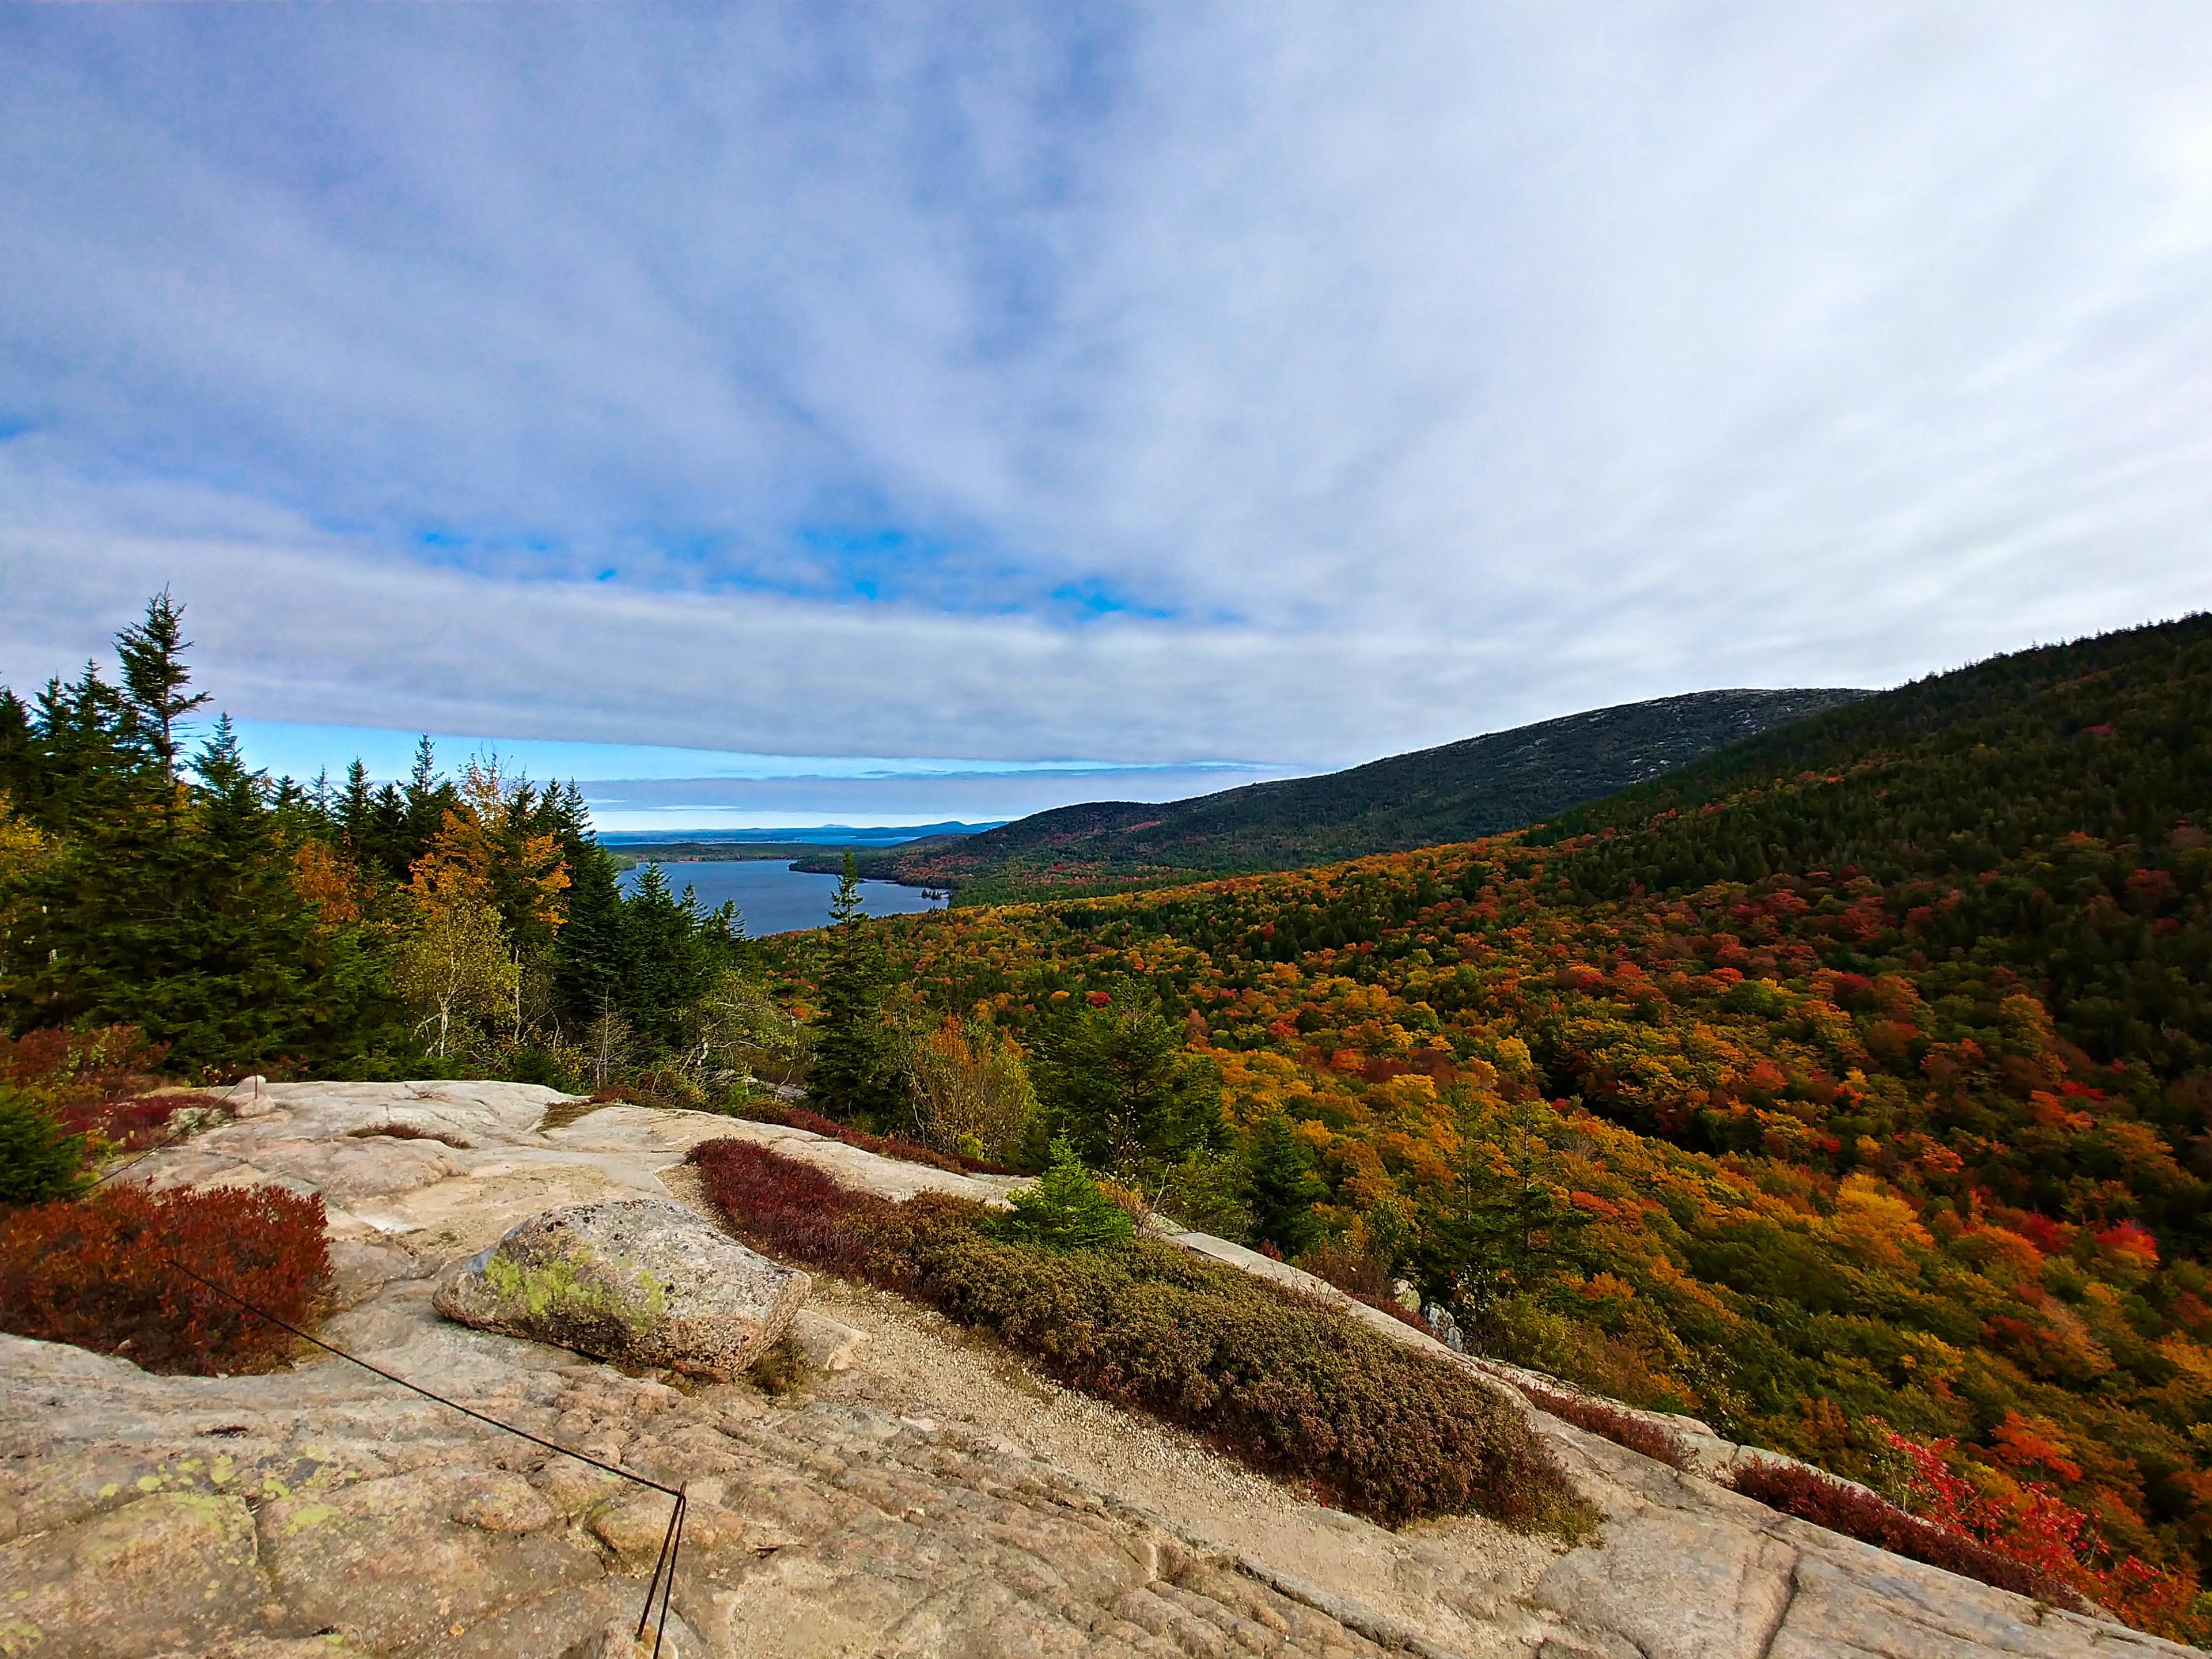 View of the autumnal forests at Acadia National Park.